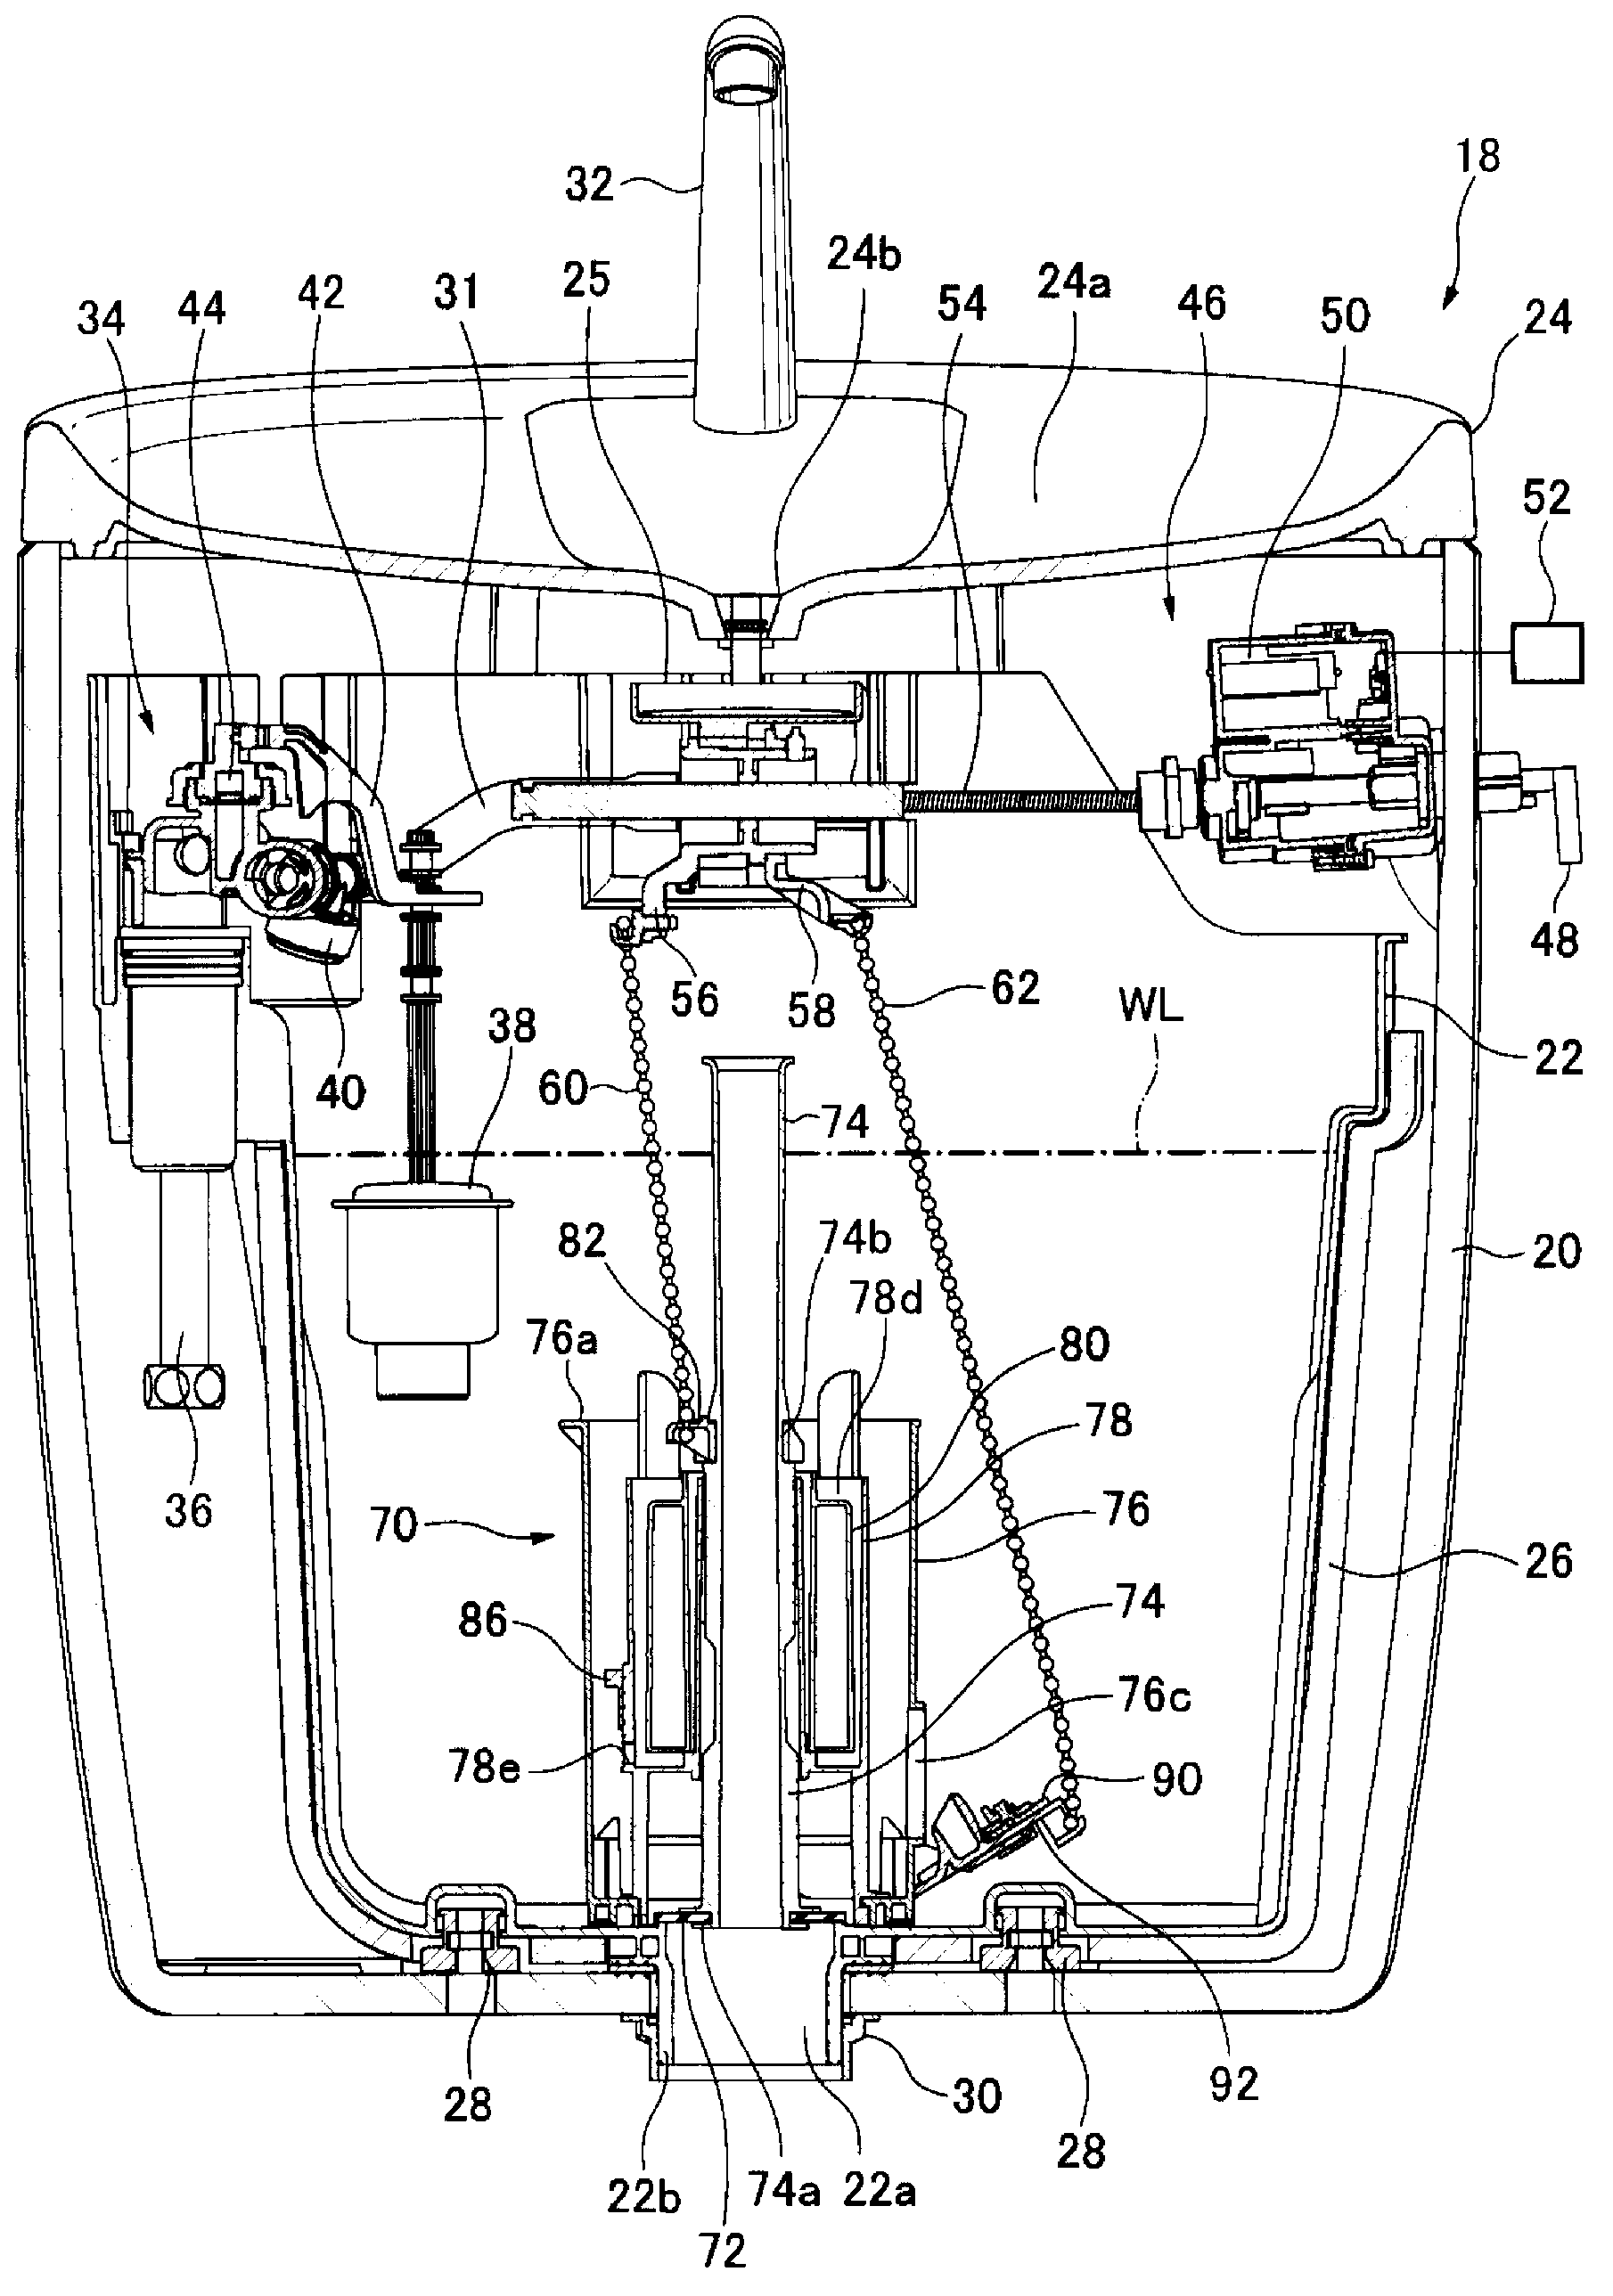 Wash water tank device and drainage device